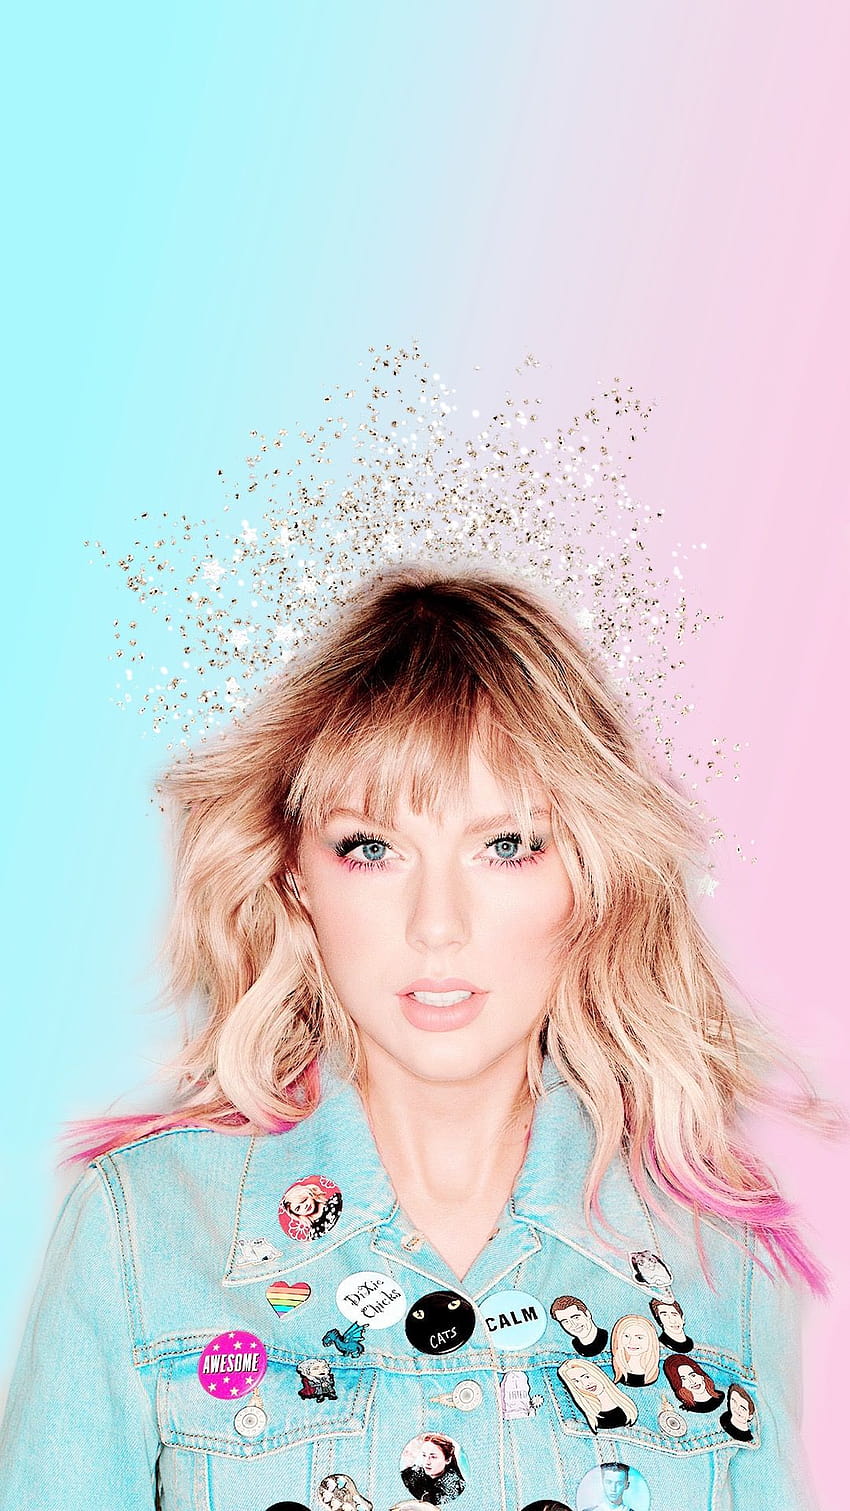 100+] Taylor Swift Background s | Wallpapers.com